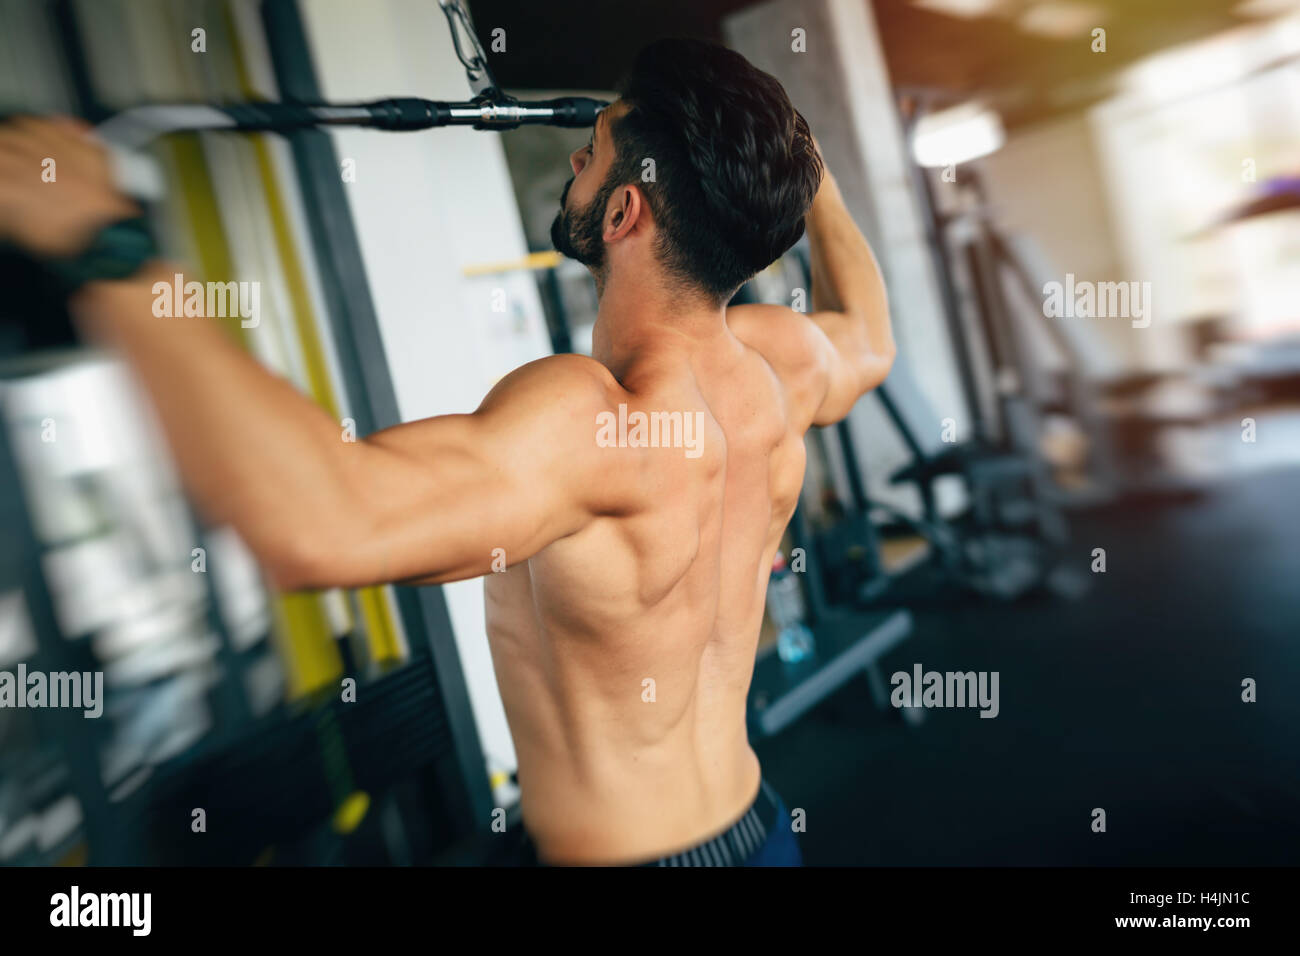 Muscular man working out in gym Banque D'Images